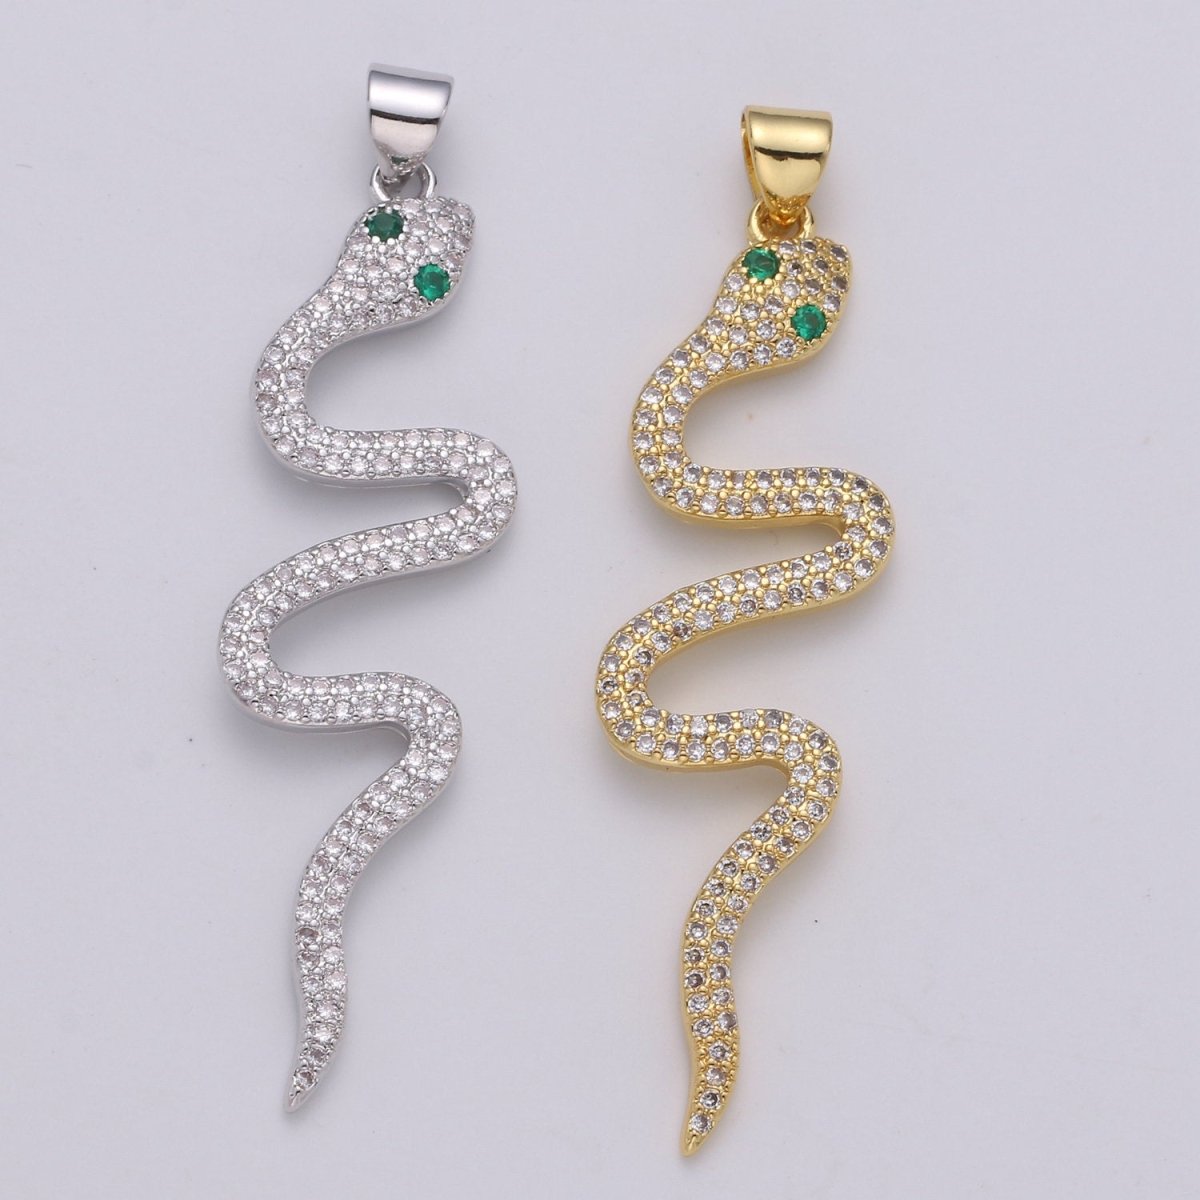 24k Gold Filled Micro Pave Snake Charm, Cubic Zirconia Serpent Pendant Charm, Gold Filled Charm, Silver Snake Pendant For DIY Jewelry I-807 I-808 - DLUXCA